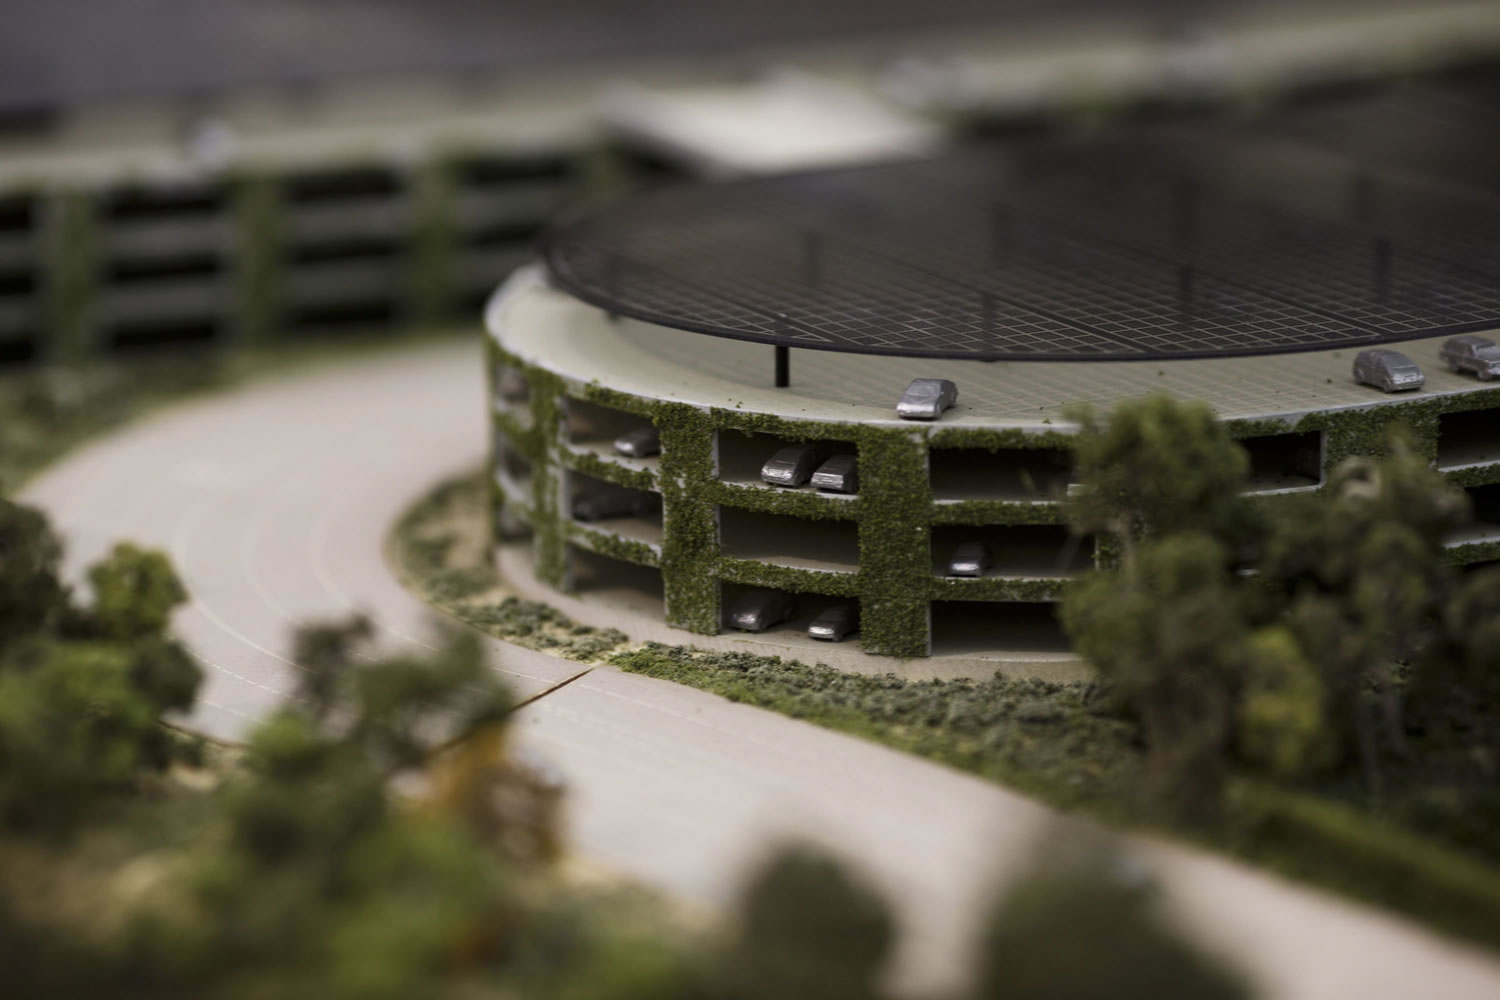 A rendering of Apple's proposed new campus in Cupertino, Calif., includes parking structures with solar panel, as shown on this model.